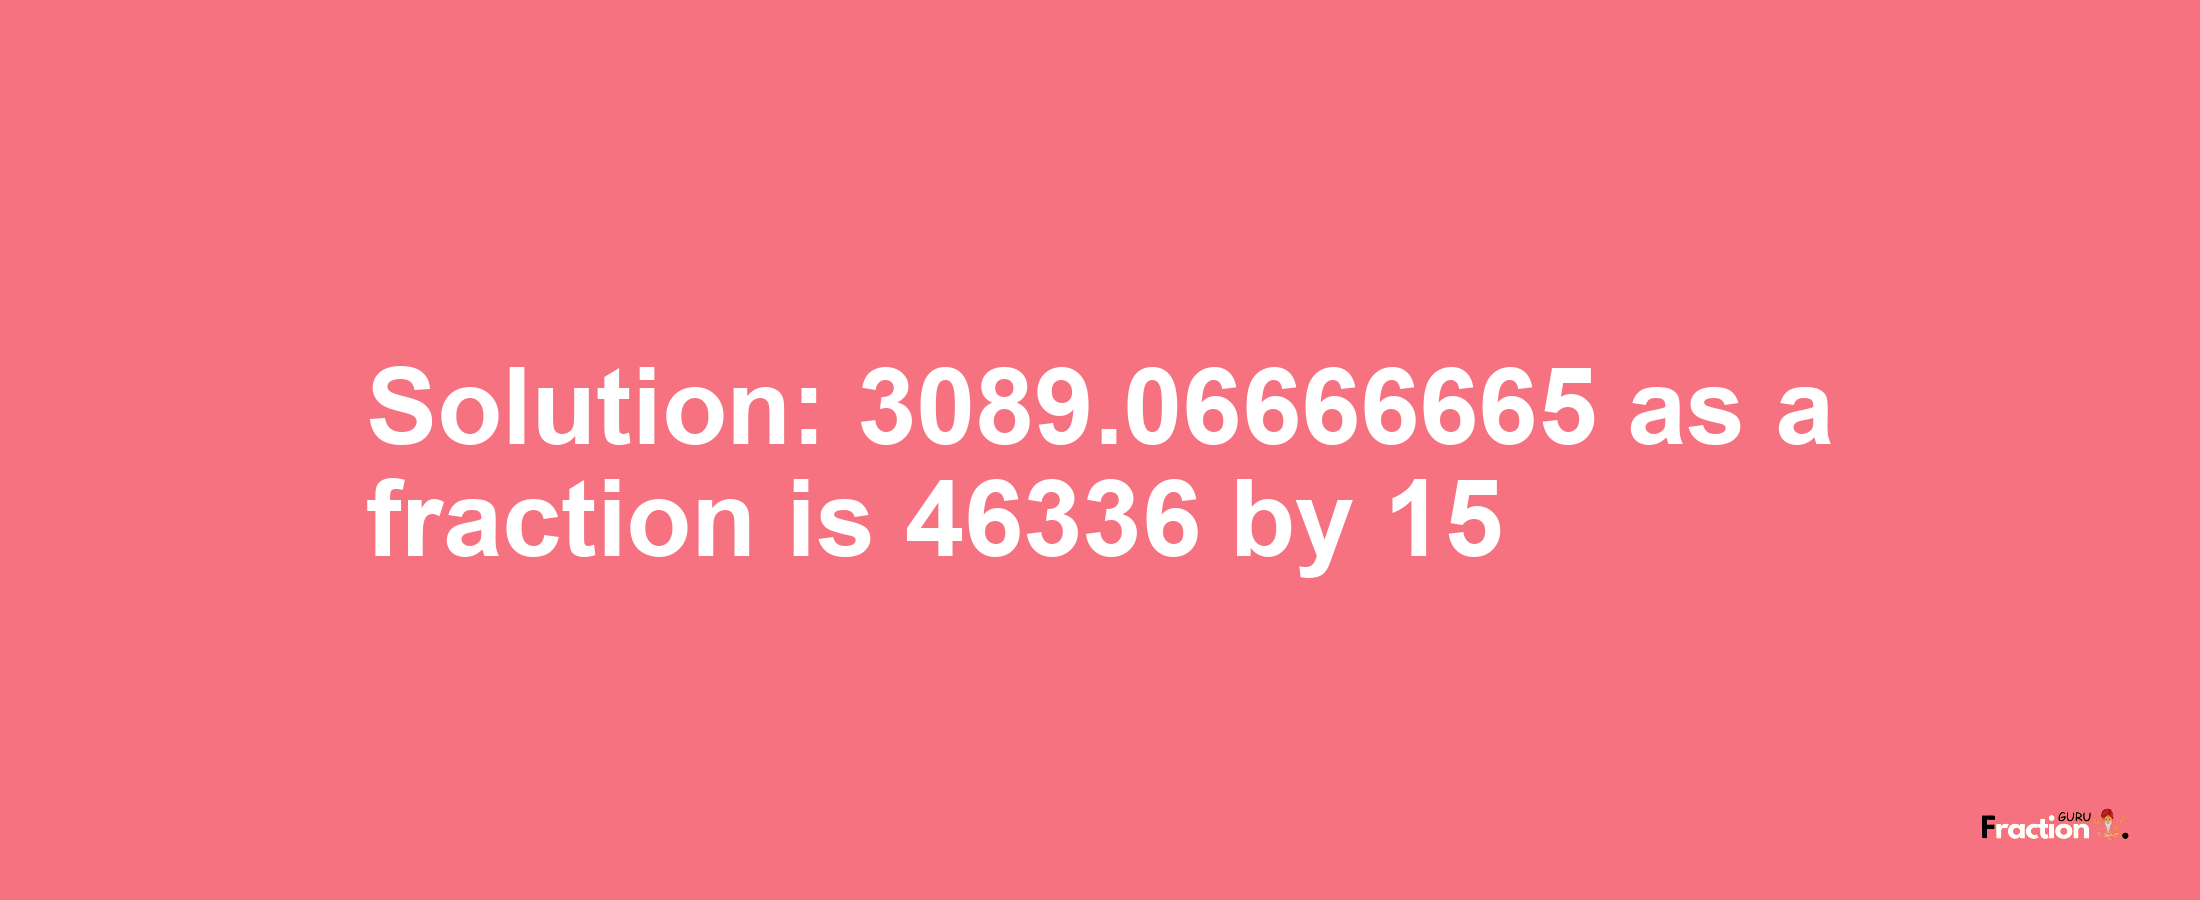 Solution:3089.06666665 as a fraction is 46336/15